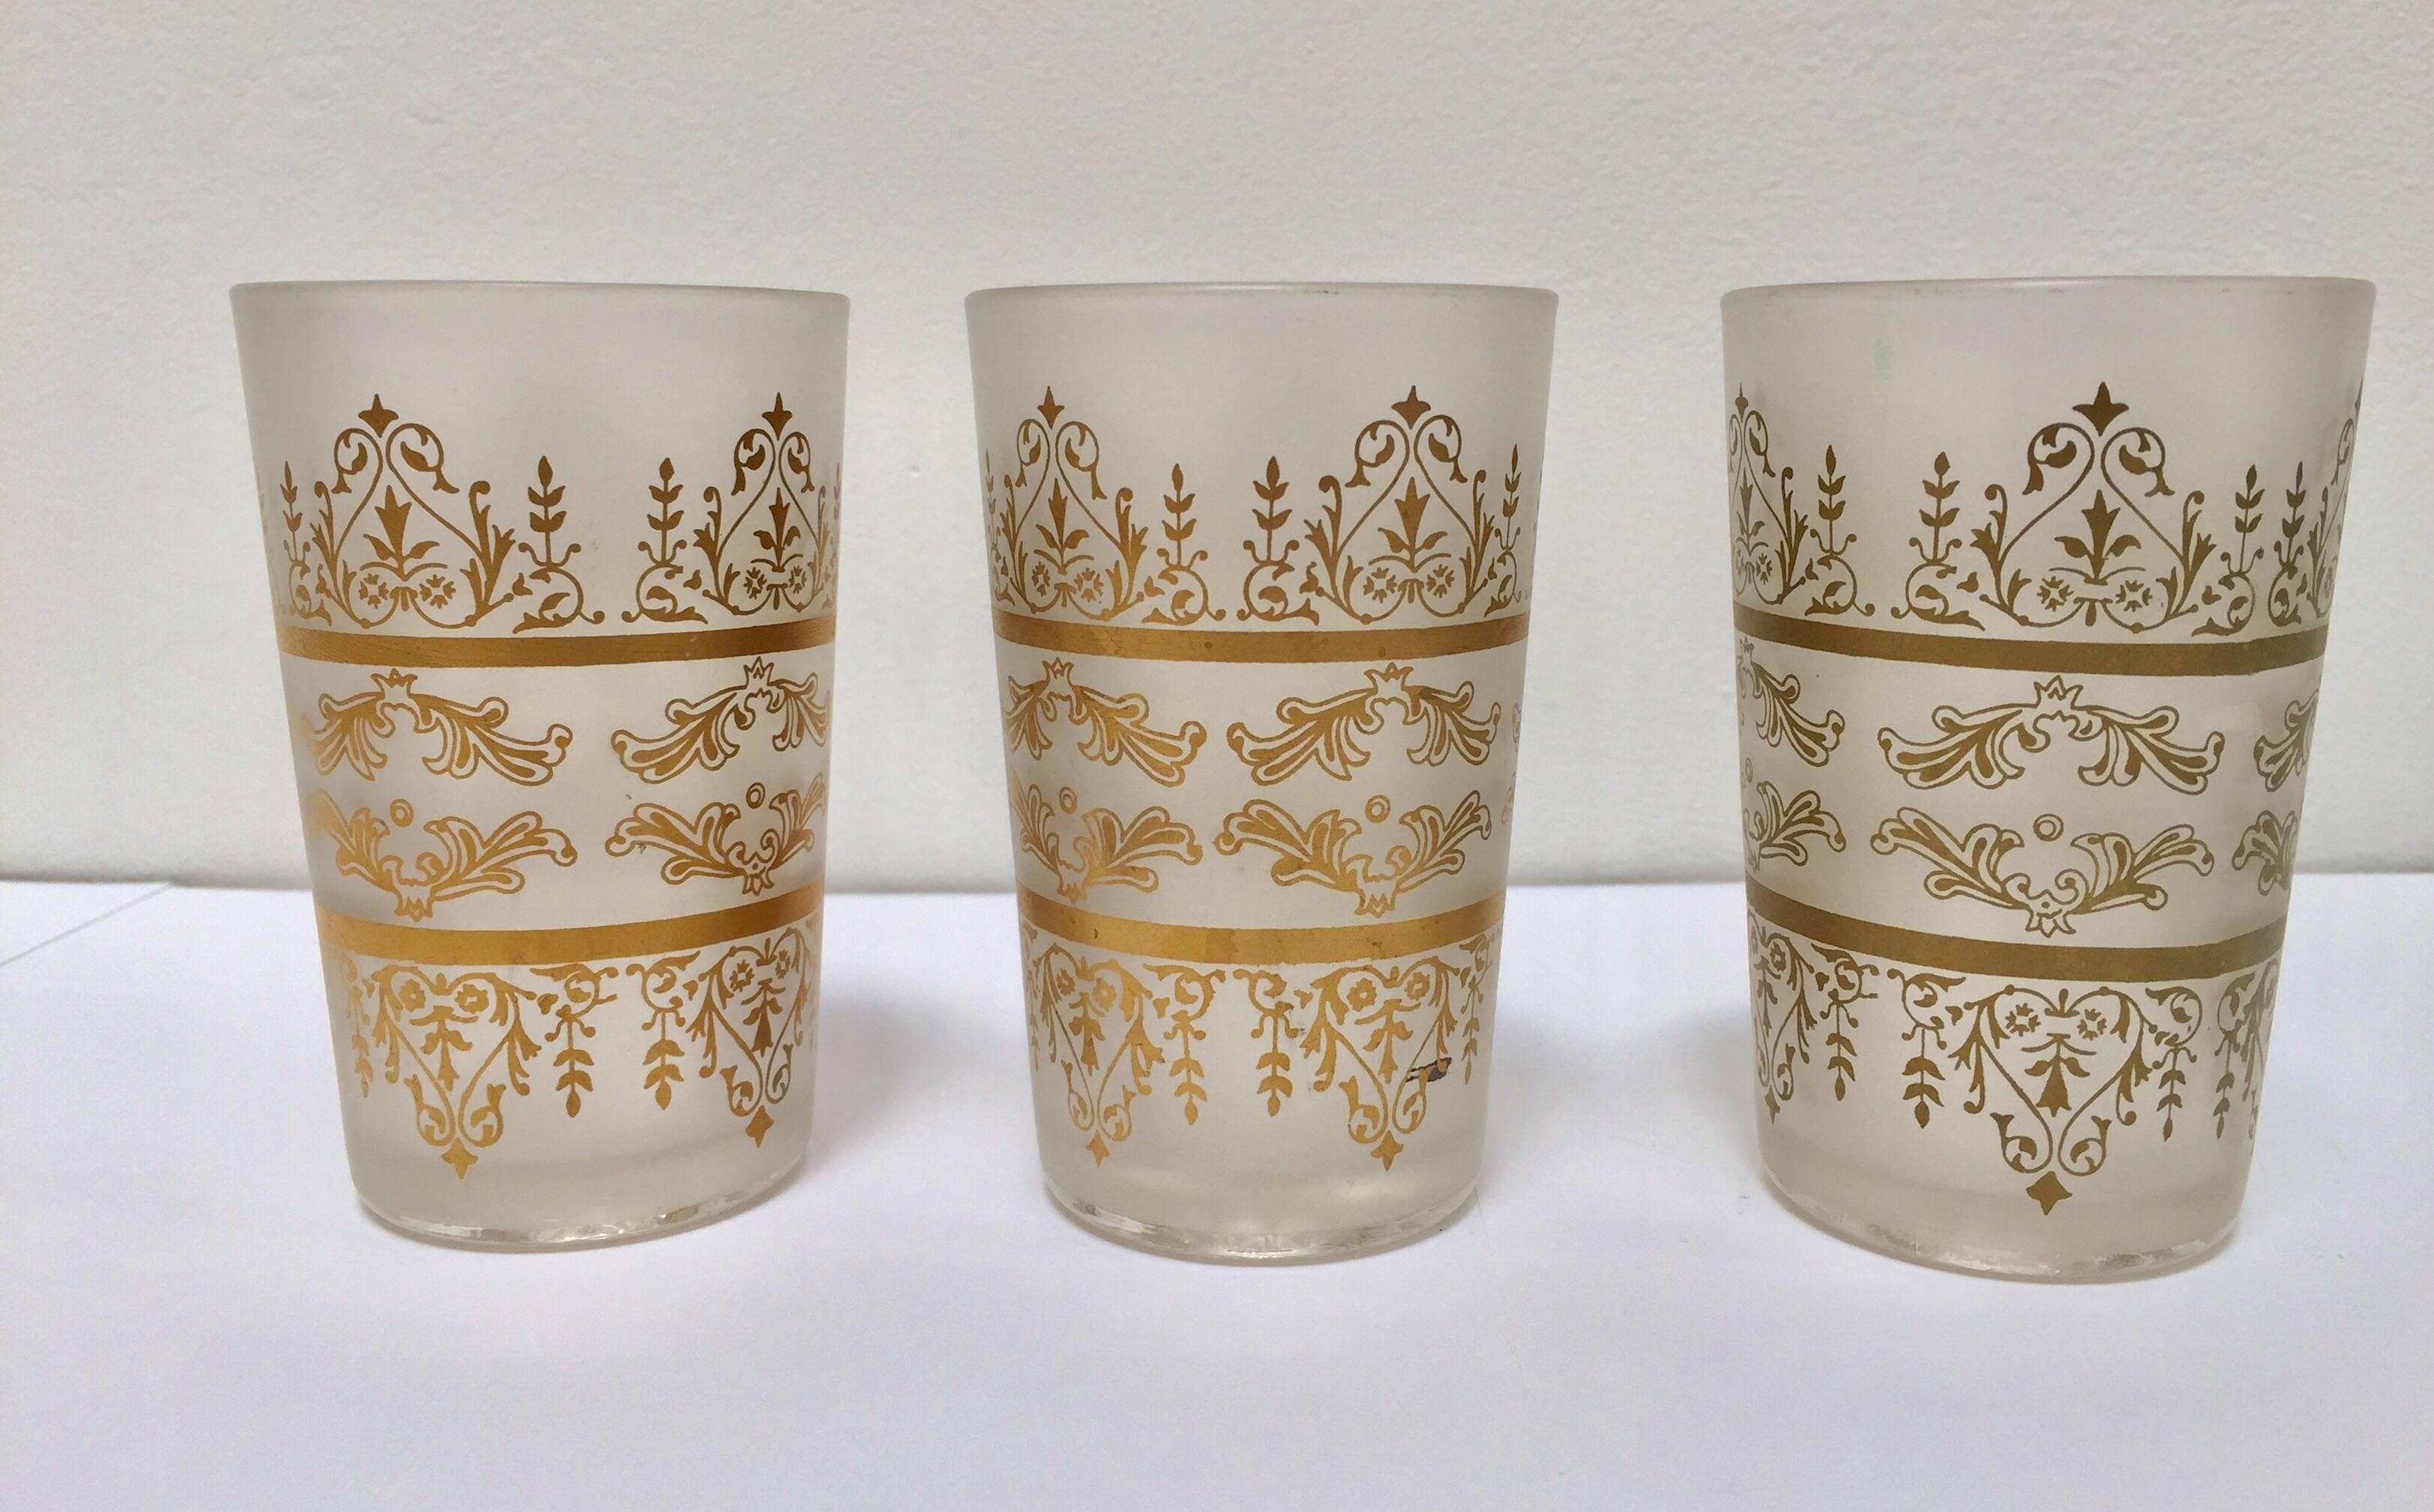 Set of six Moroccan opaline white and gold glasses.
Decorated with a classical traditional Moorish pattern gold frieze overlay.
Use these elegant glasses for Moroccan tea, or any hot or cold drink.
Perfect for the holidays and gorgeous on display in